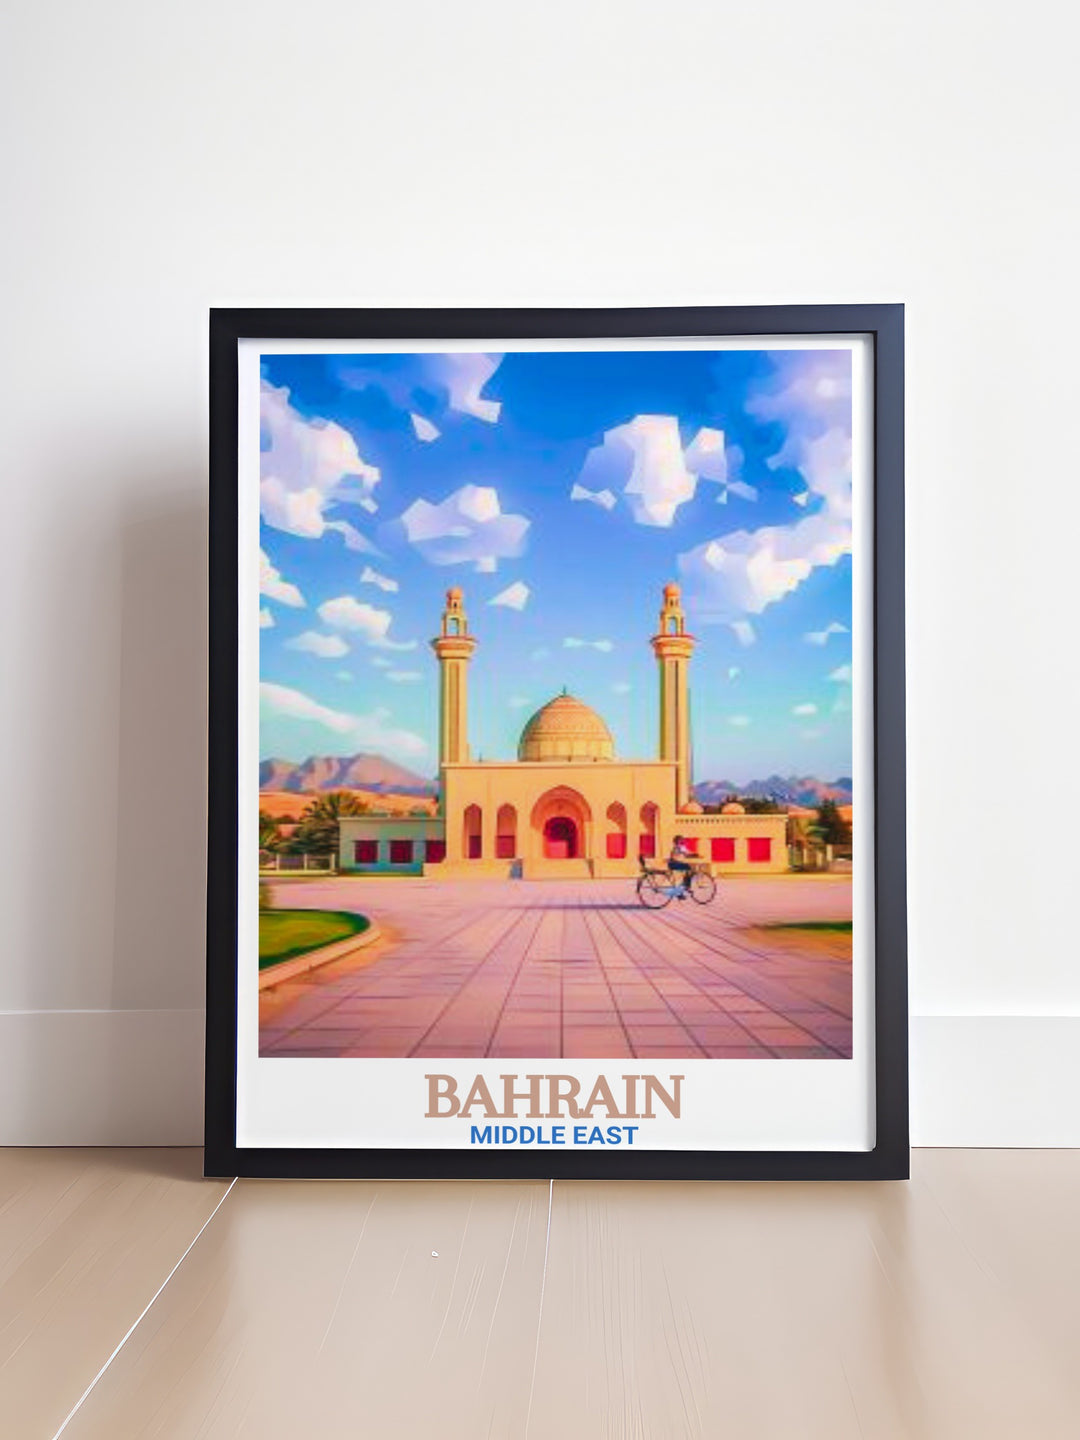 Elegant Bahrain Travel Print of Al Fateh Grand Mosque capturing the architectural beauty and cultural significance of one of the most famous landmarks in Bahrain